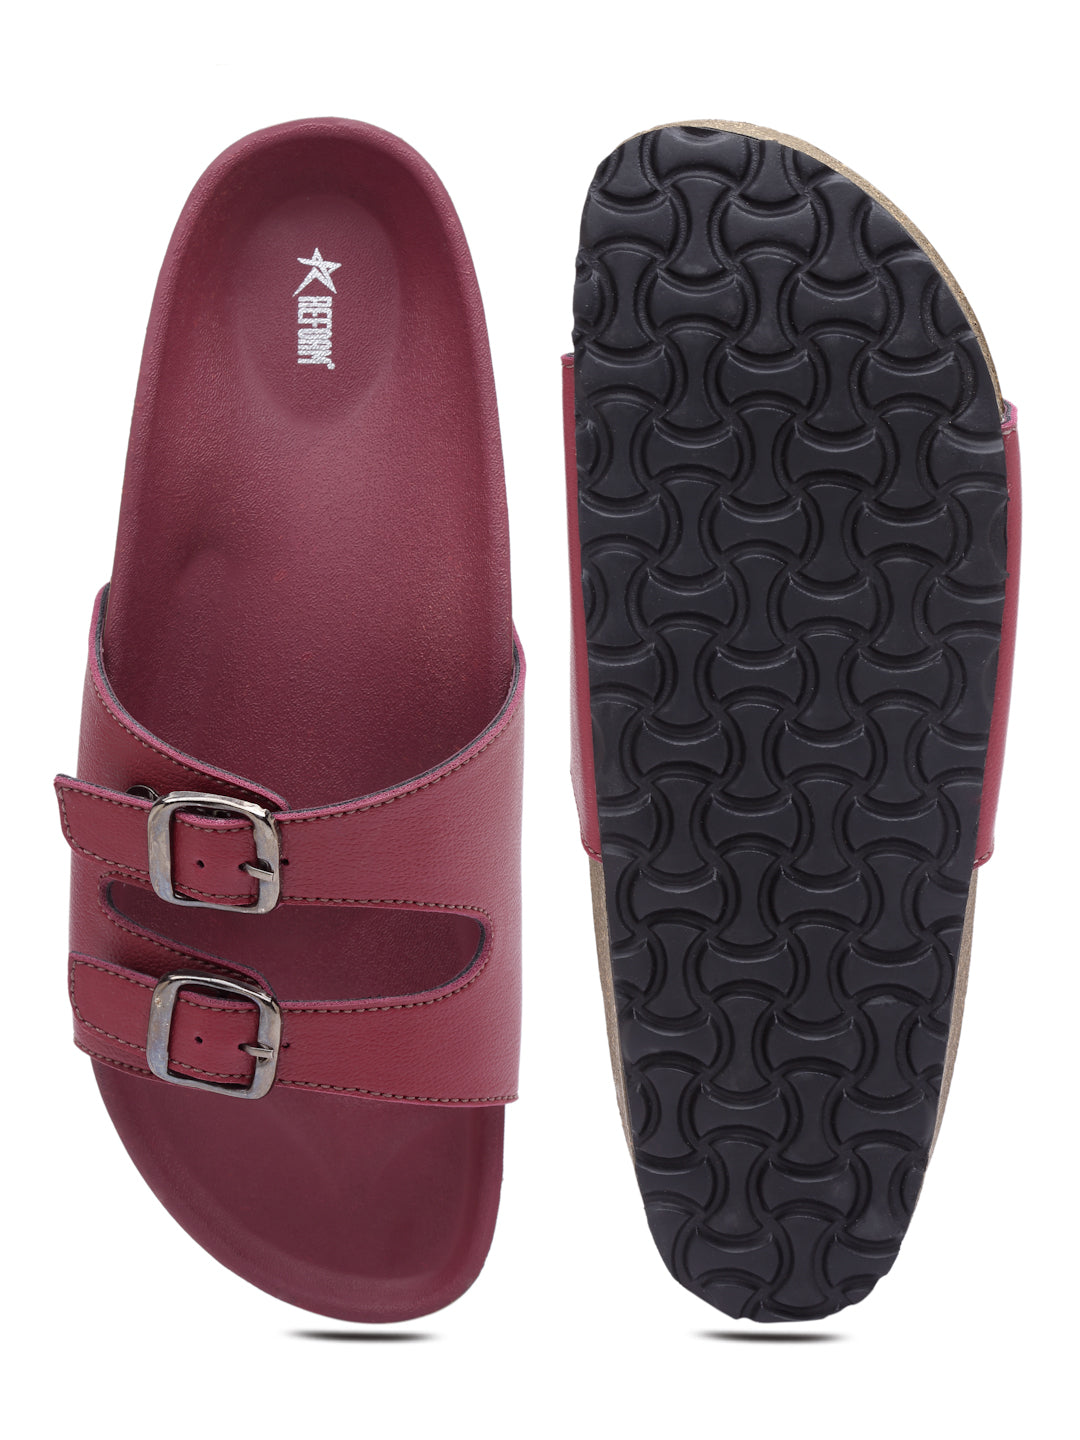 Women's Maroon Synthetic Leather Casual Sandal